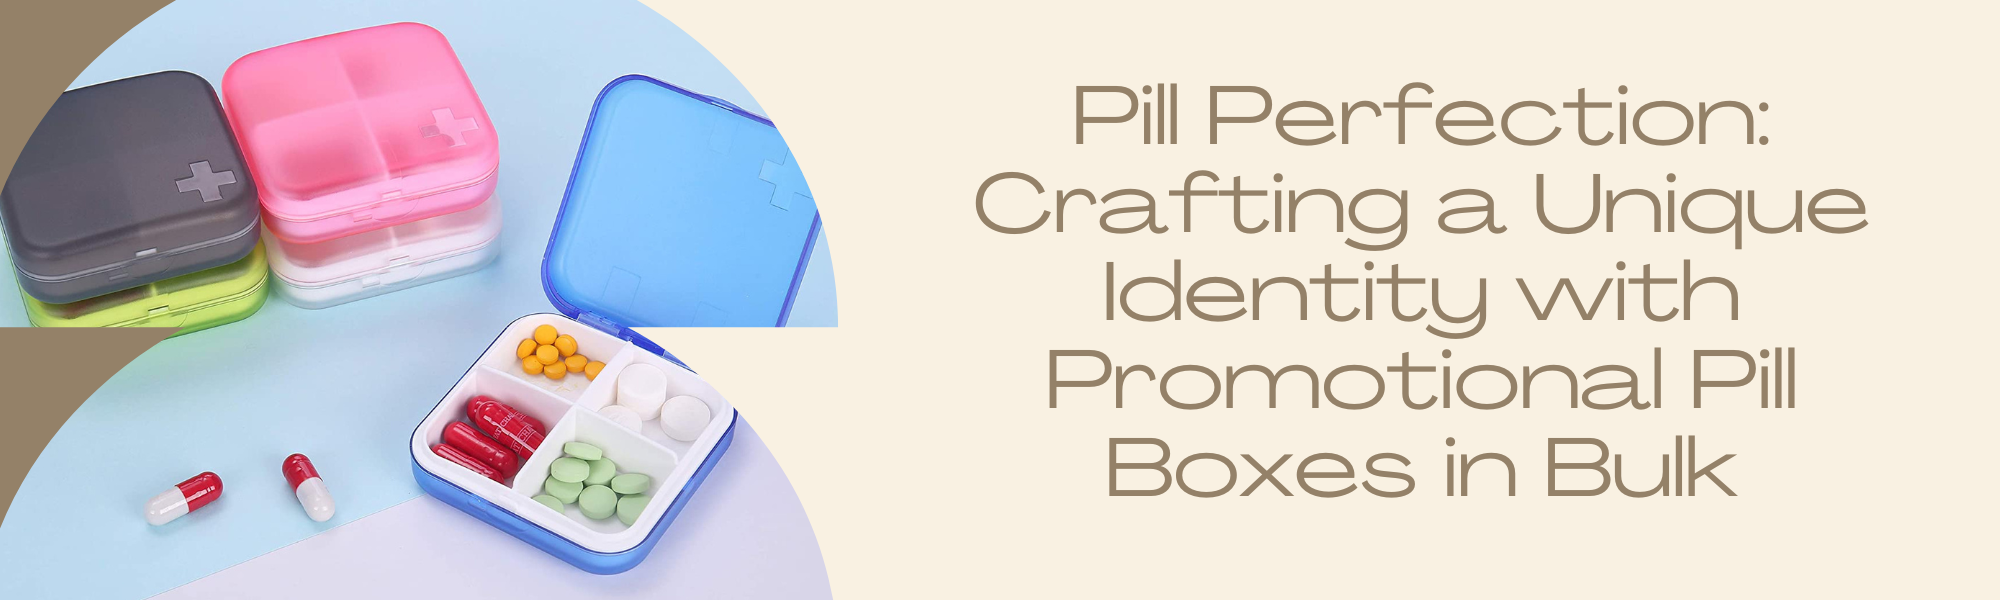 Pill Perfection: Crafting a Unique Identity with Promotional Pill Boxes in Bulk - NBA News Updates